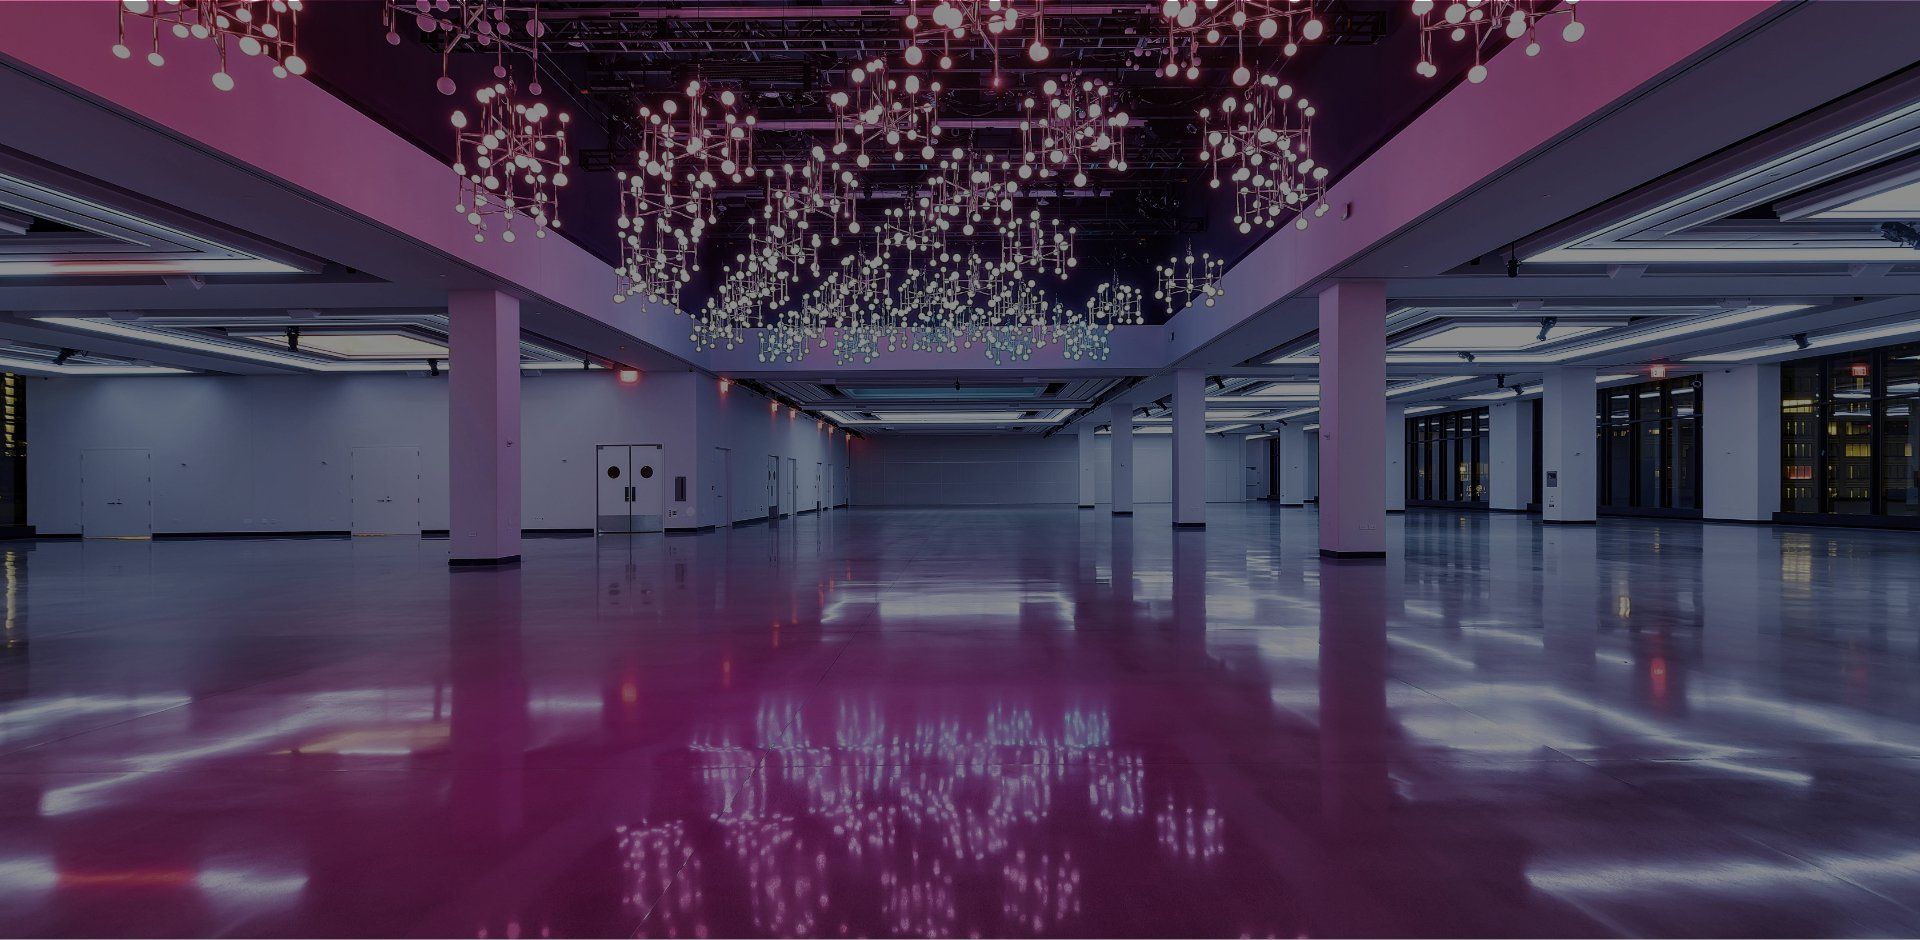 A large empty room with purple lights on the ceiling.